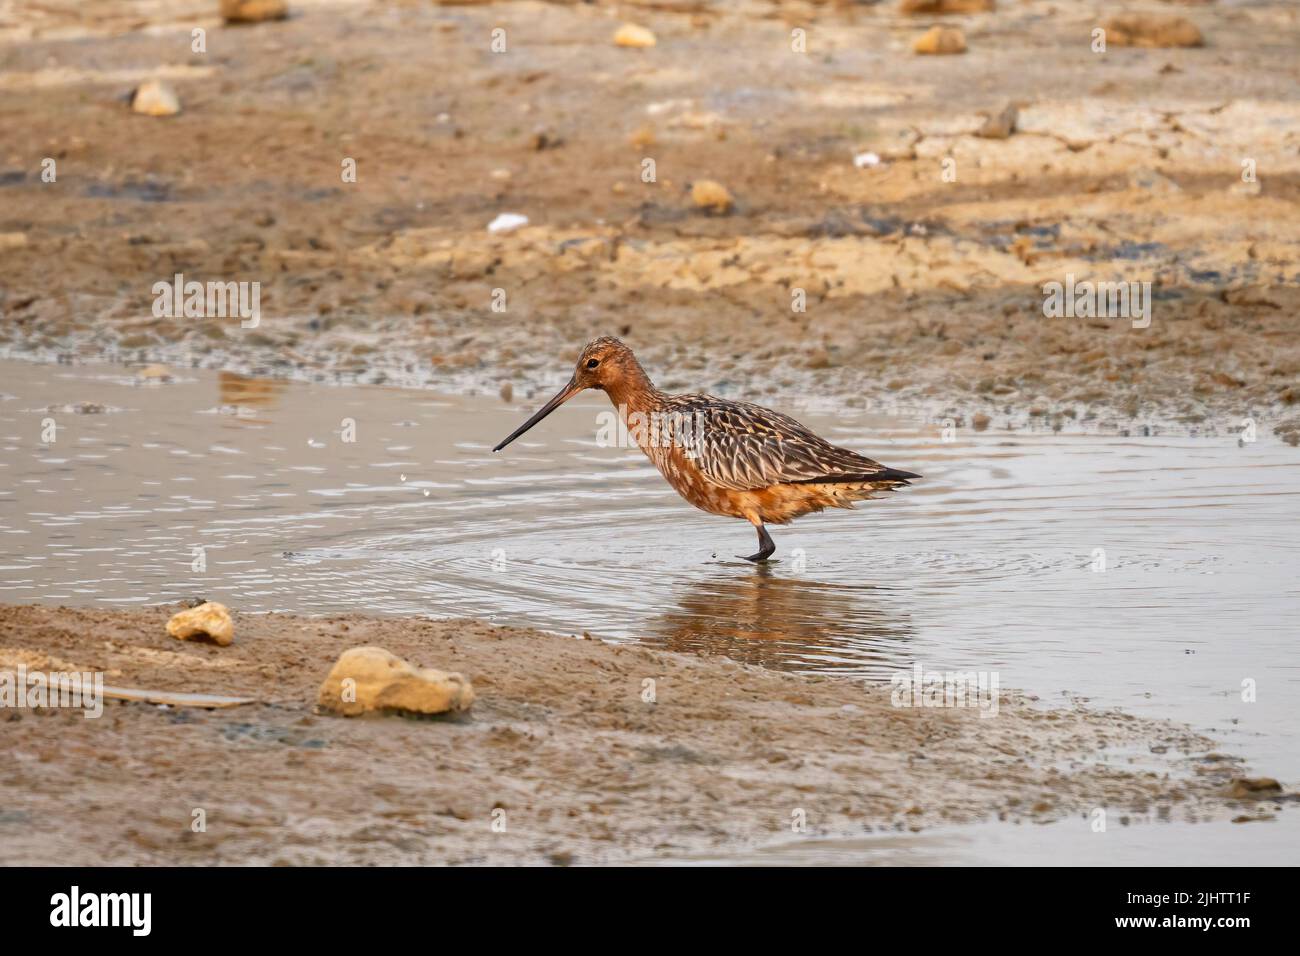 A bar-tailed godwit (Limosa lapponica) in the Beddington Farmlands nature reserve in Sutton, London. Stock Photo